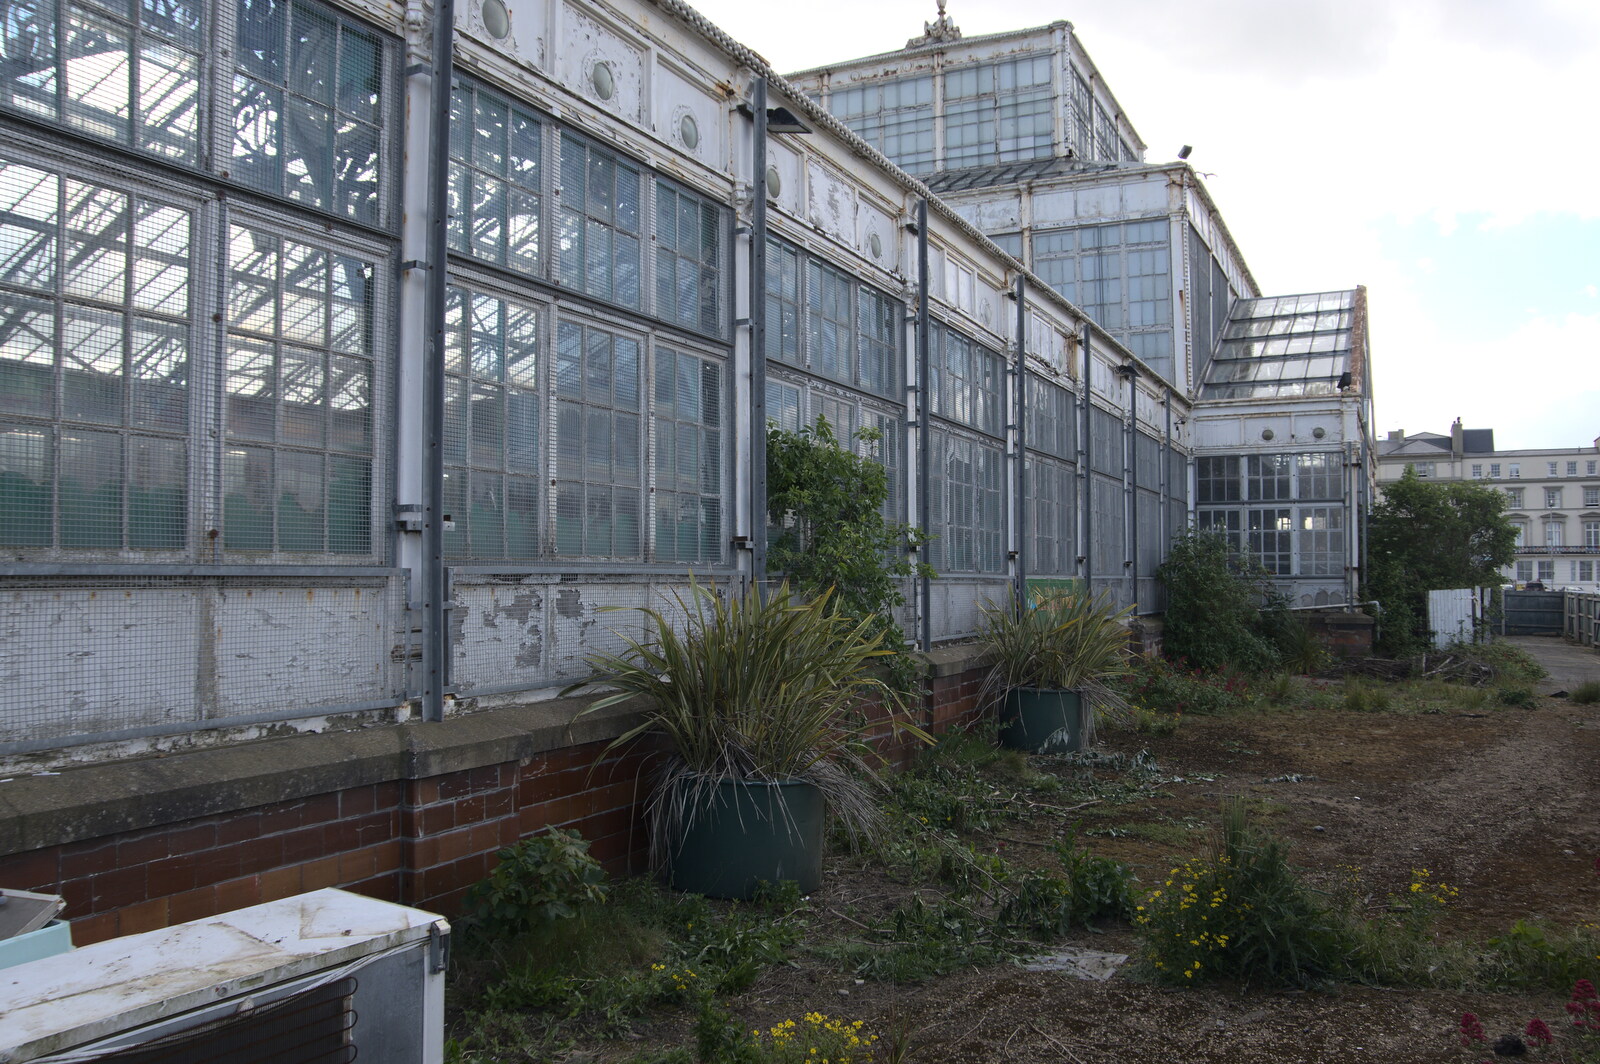 Another view of the Winter Gardens from Faded Seaside Glamour: A Weekend in Great Yarmouth, Norfolk - 29th May 2022